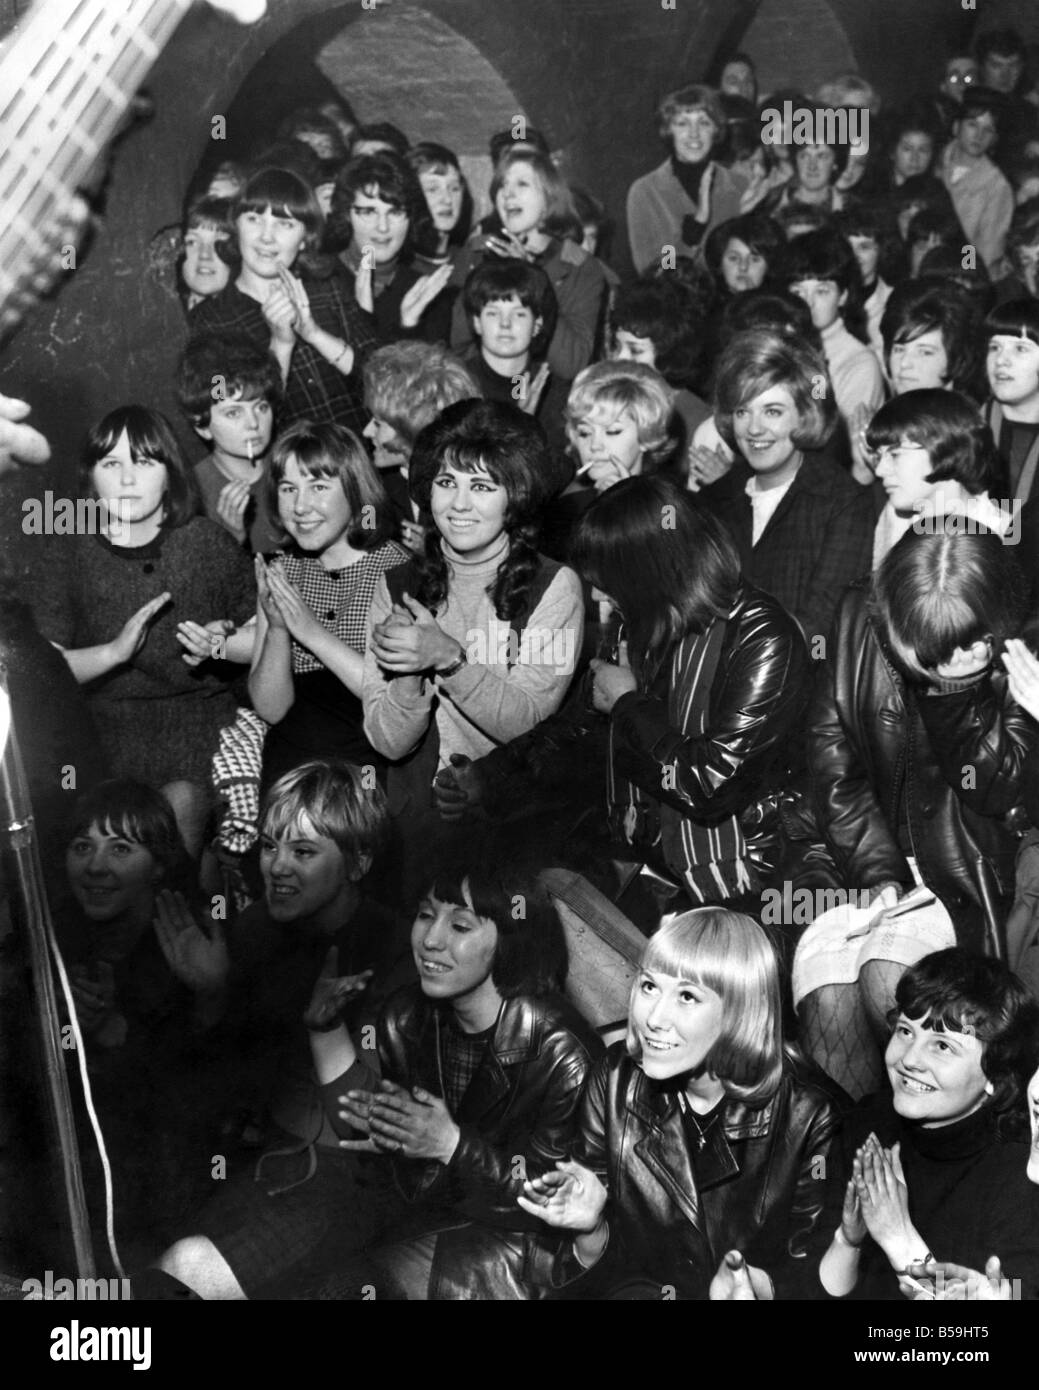 A lunchtime audience at the Cavern. Club in Liverpool. The club has been the springboard to success for many bands, the latest being a four man group called 'The Beatles' (Not performing in this image) December 1963 P008118 Stock Photo